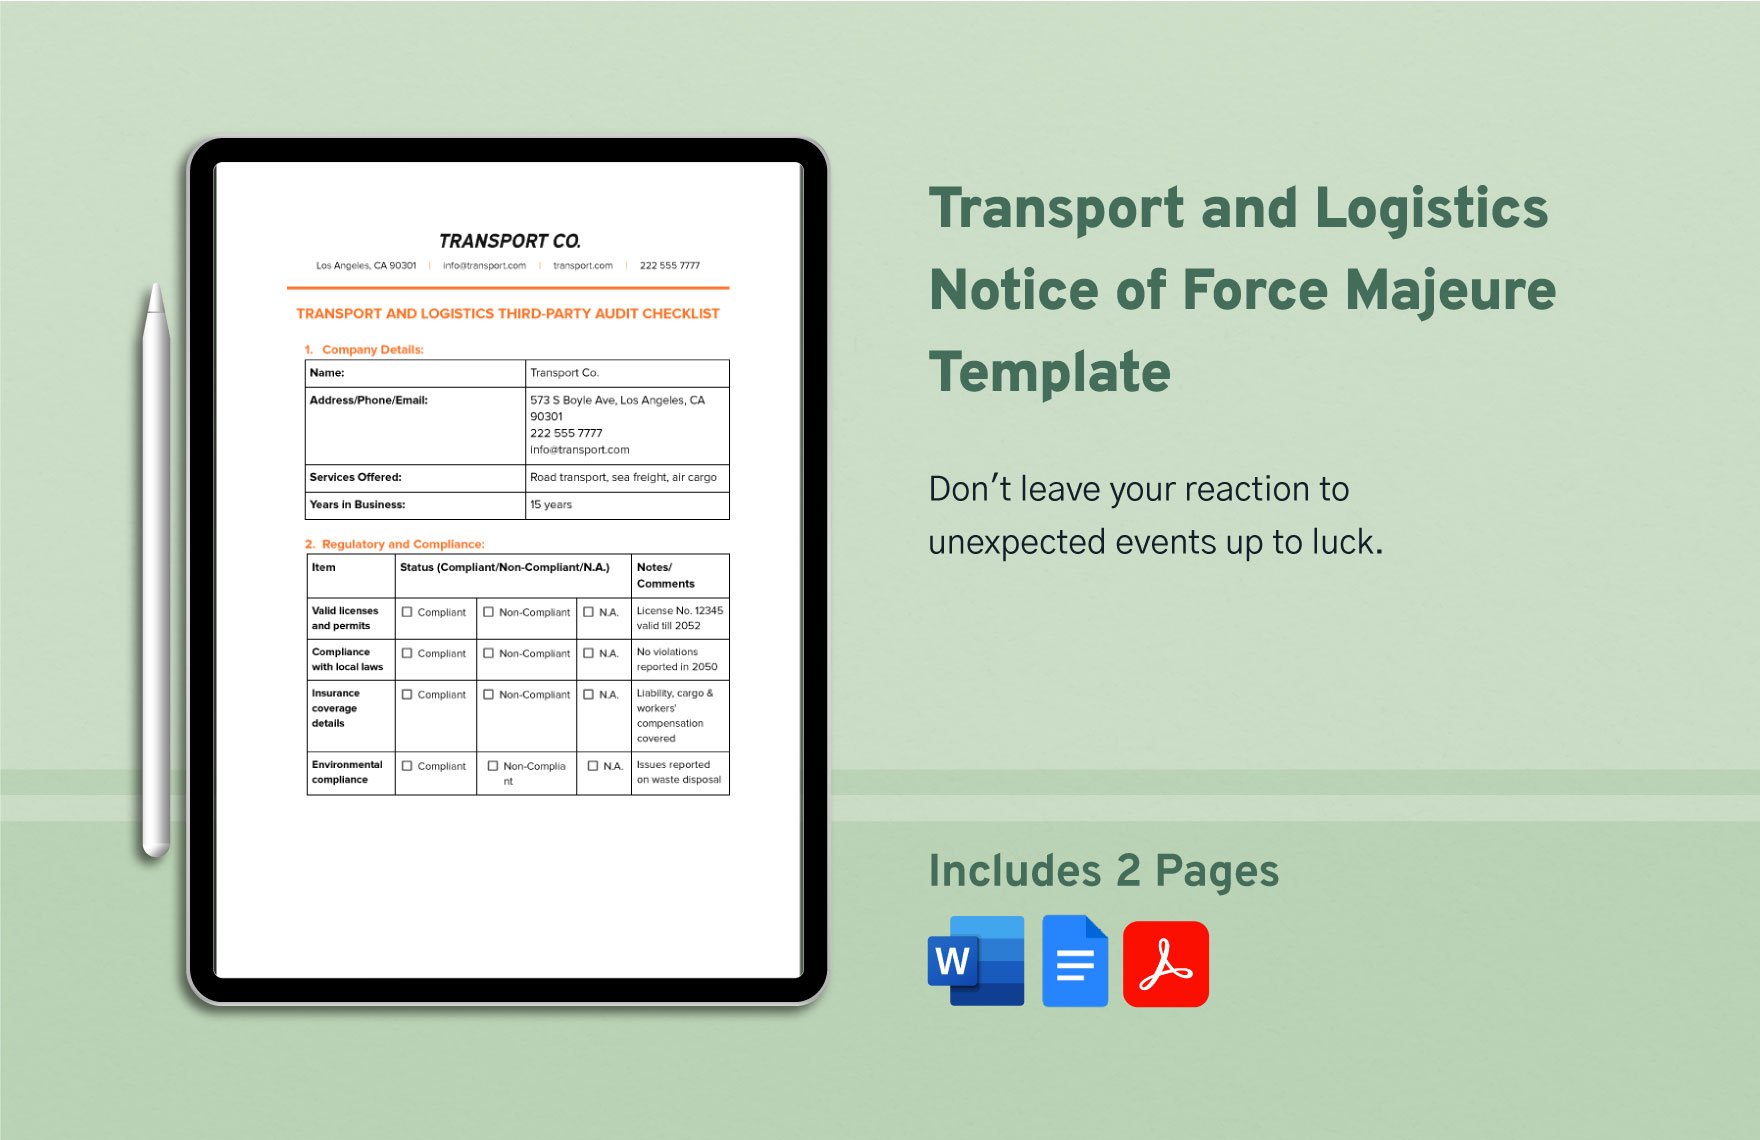 transport-and-logistics-notice-of-force-majeure